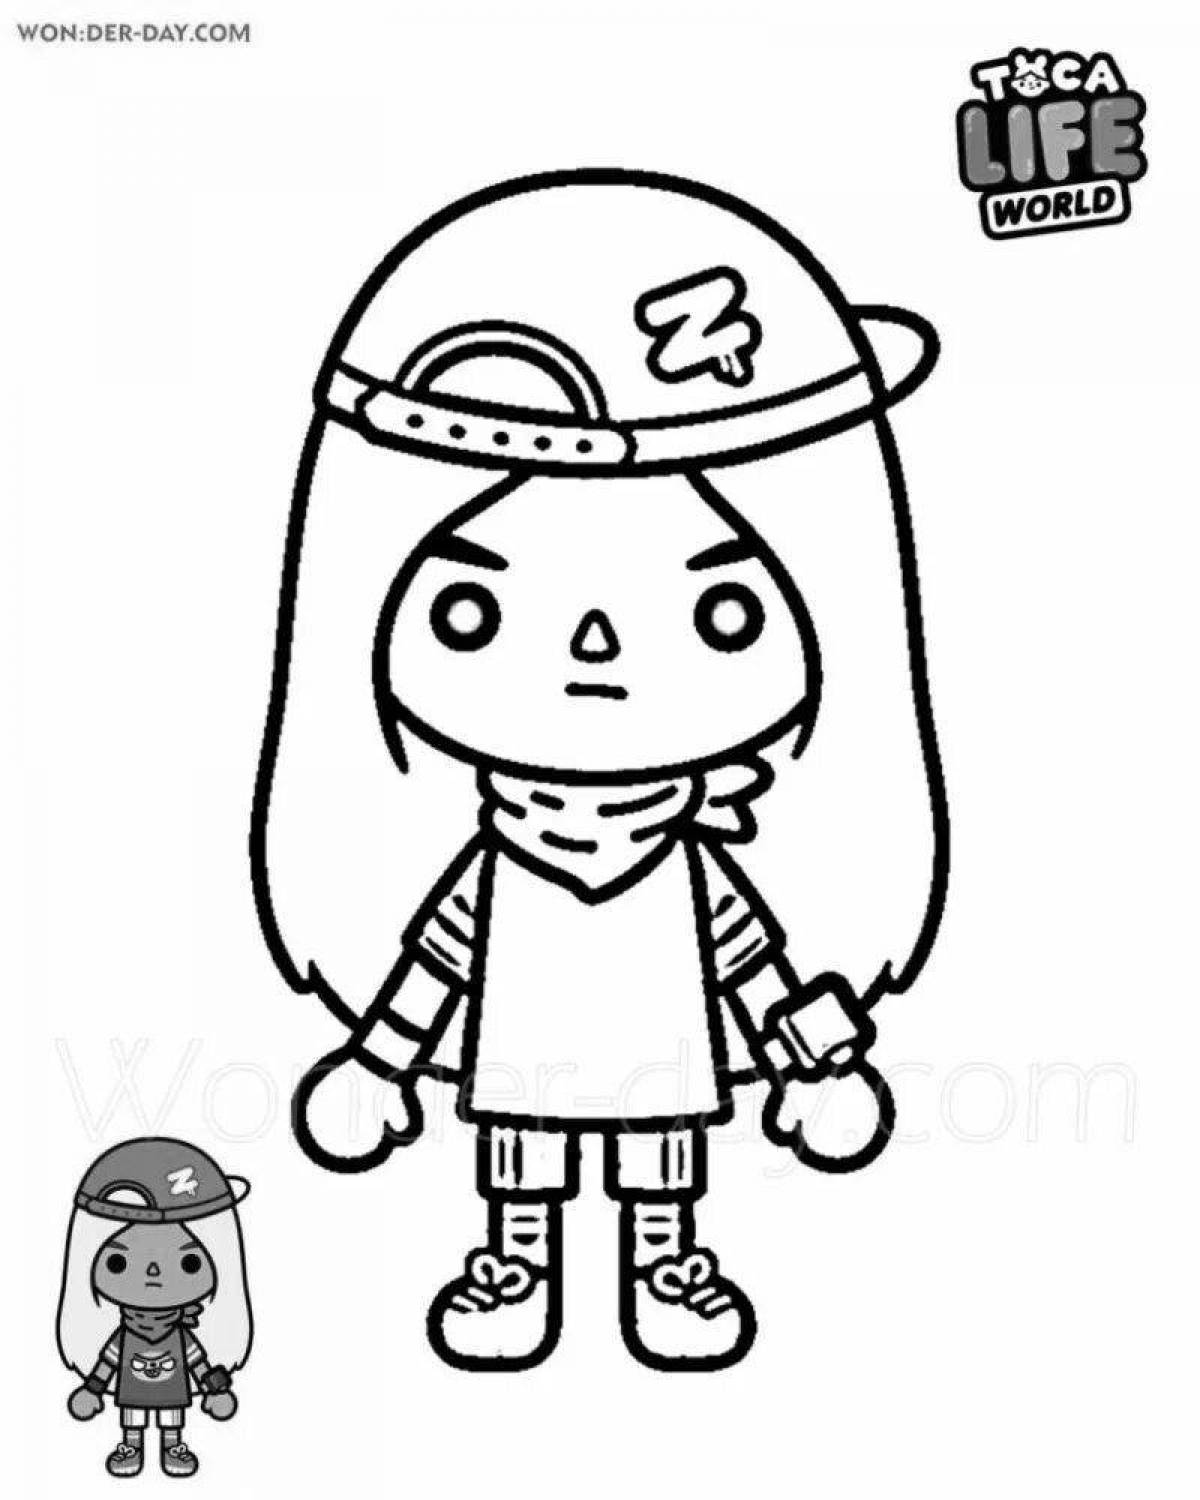 Adorable coloring book with black and white little Toka Boka characters